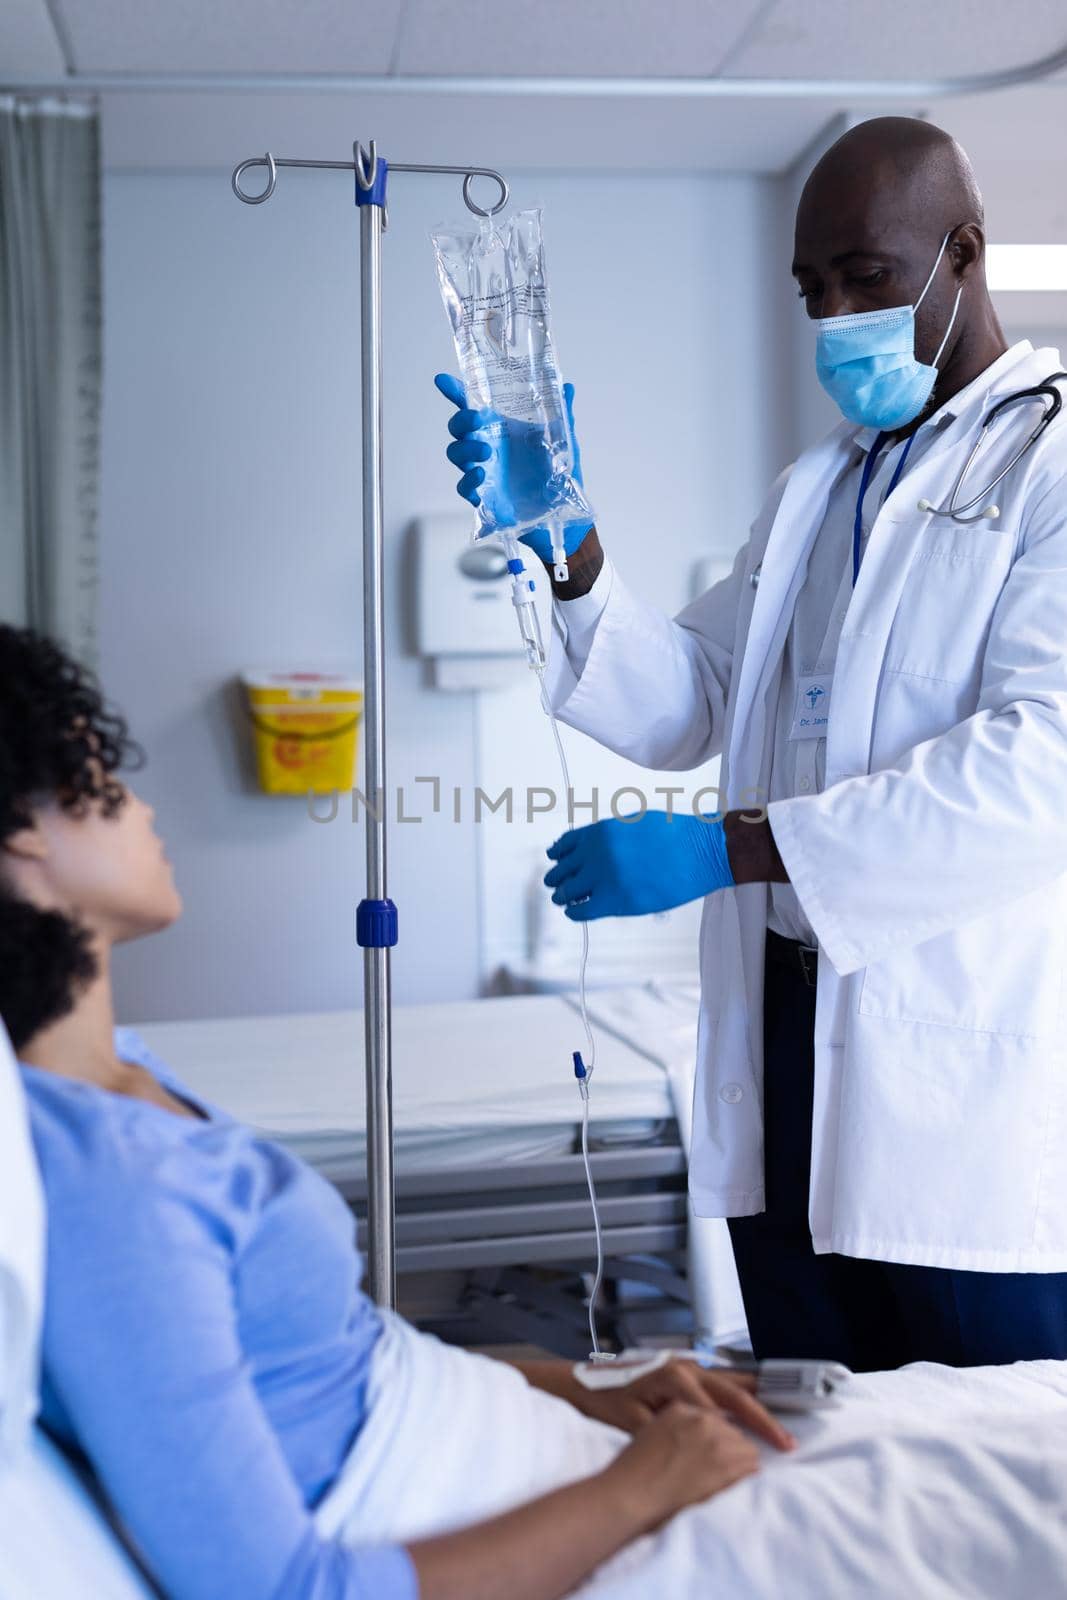 African american male doctor wearing face mask preparing iv bag for patient sitting in hospital bed. medicine, health and healthcare services during coronavirus covid 19 pandemic.